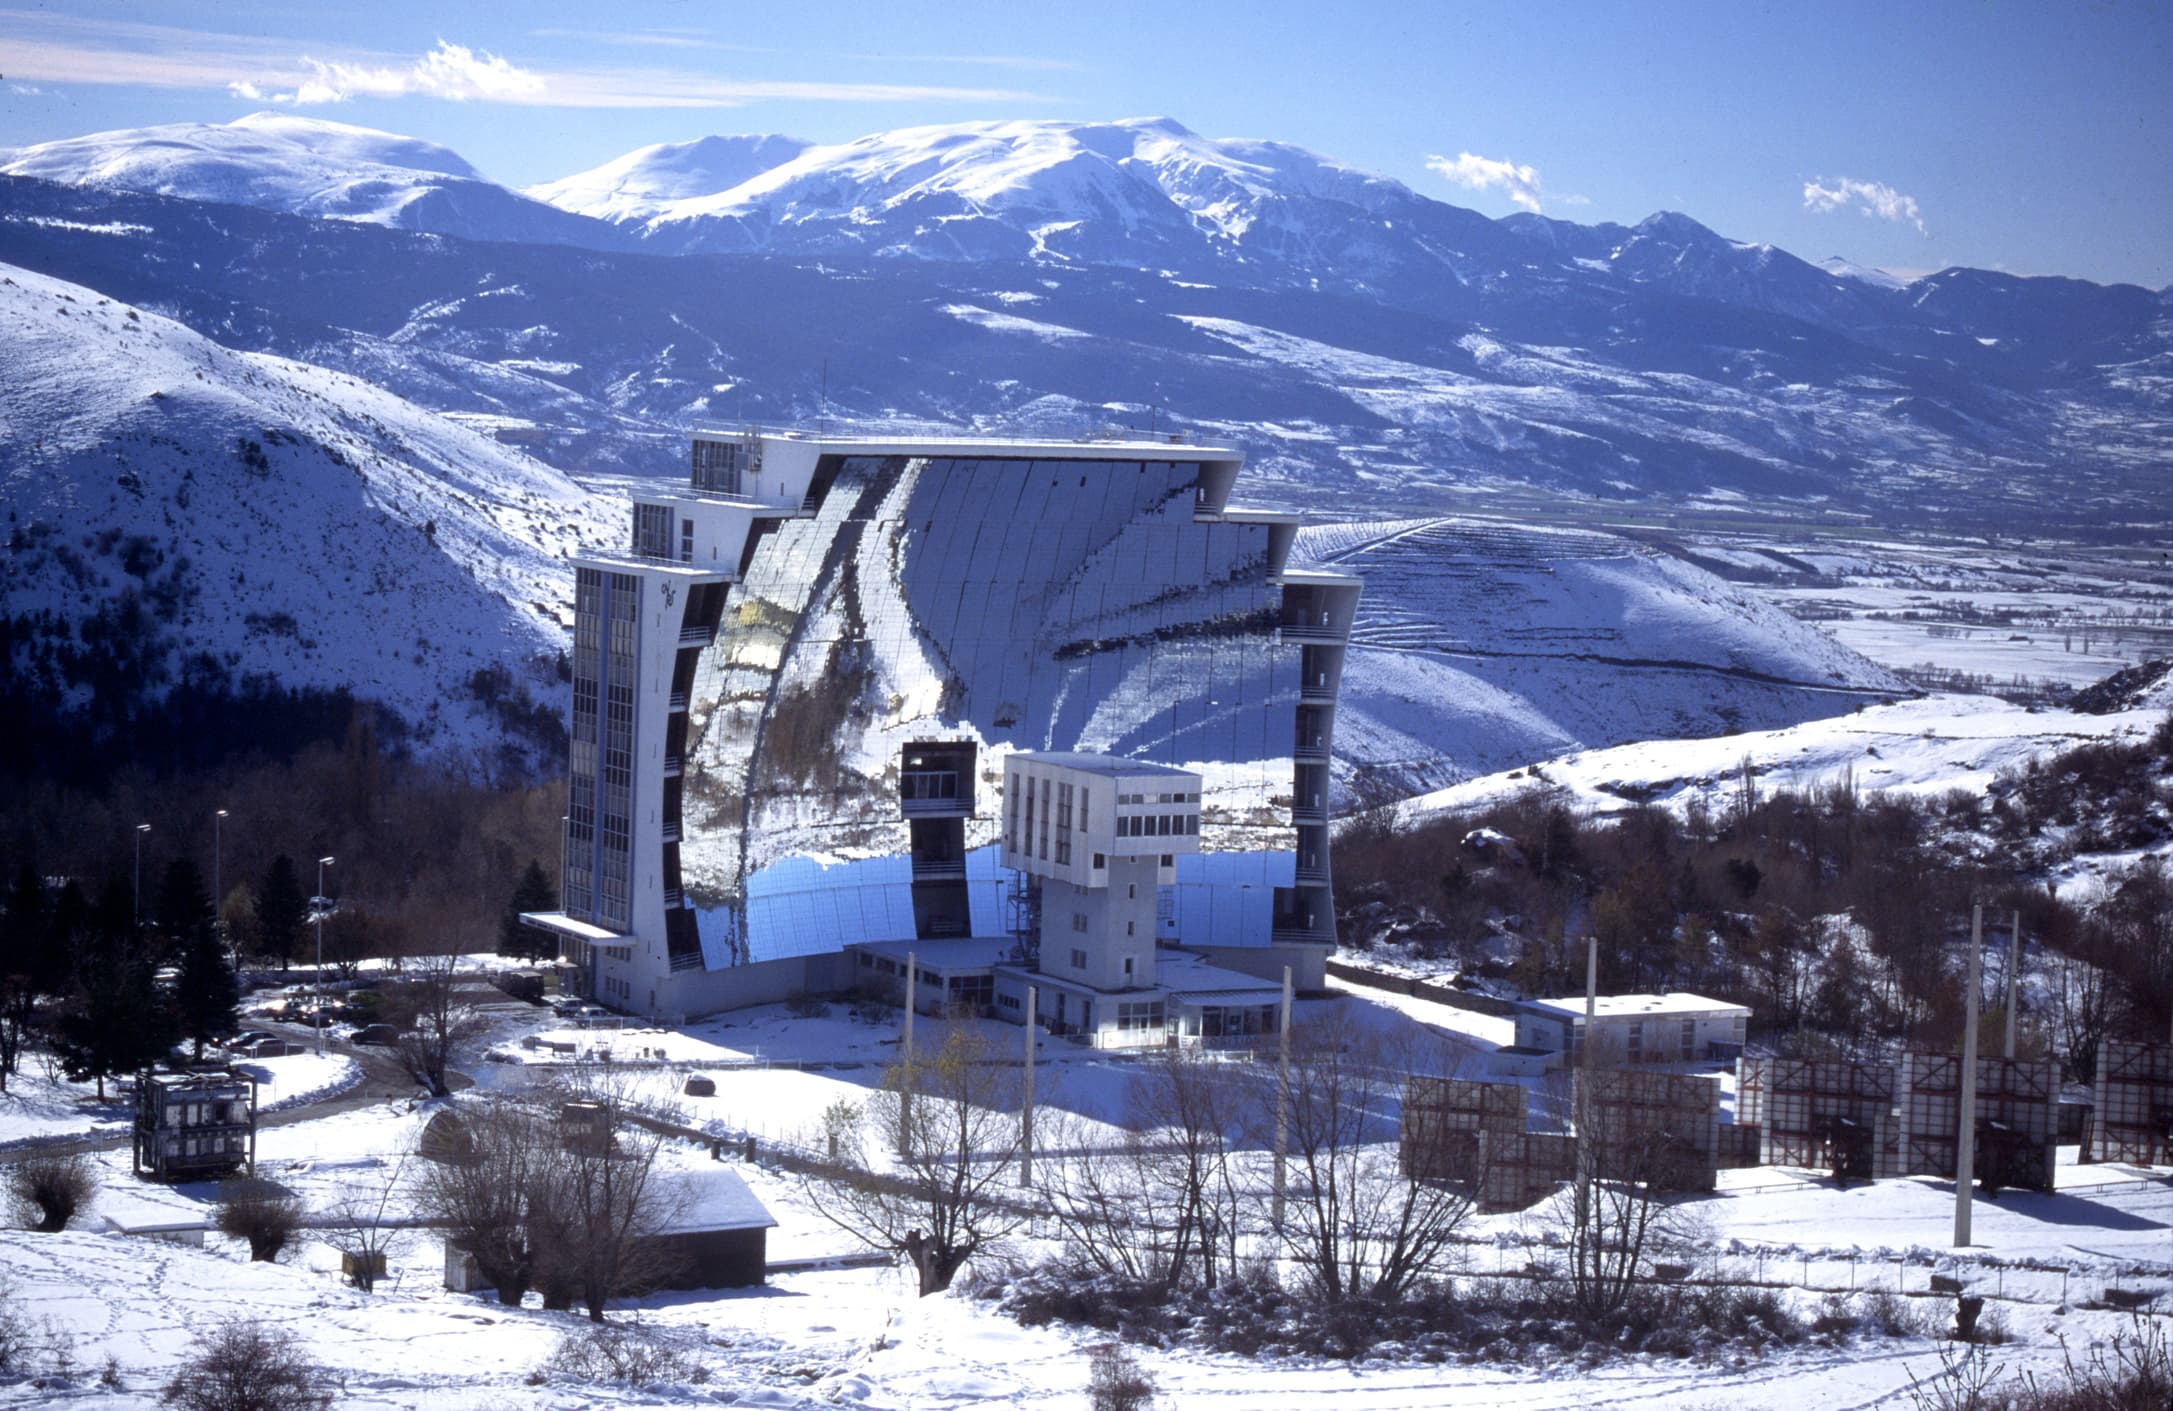 Odeillo Solar Furnace surrounded by snow.